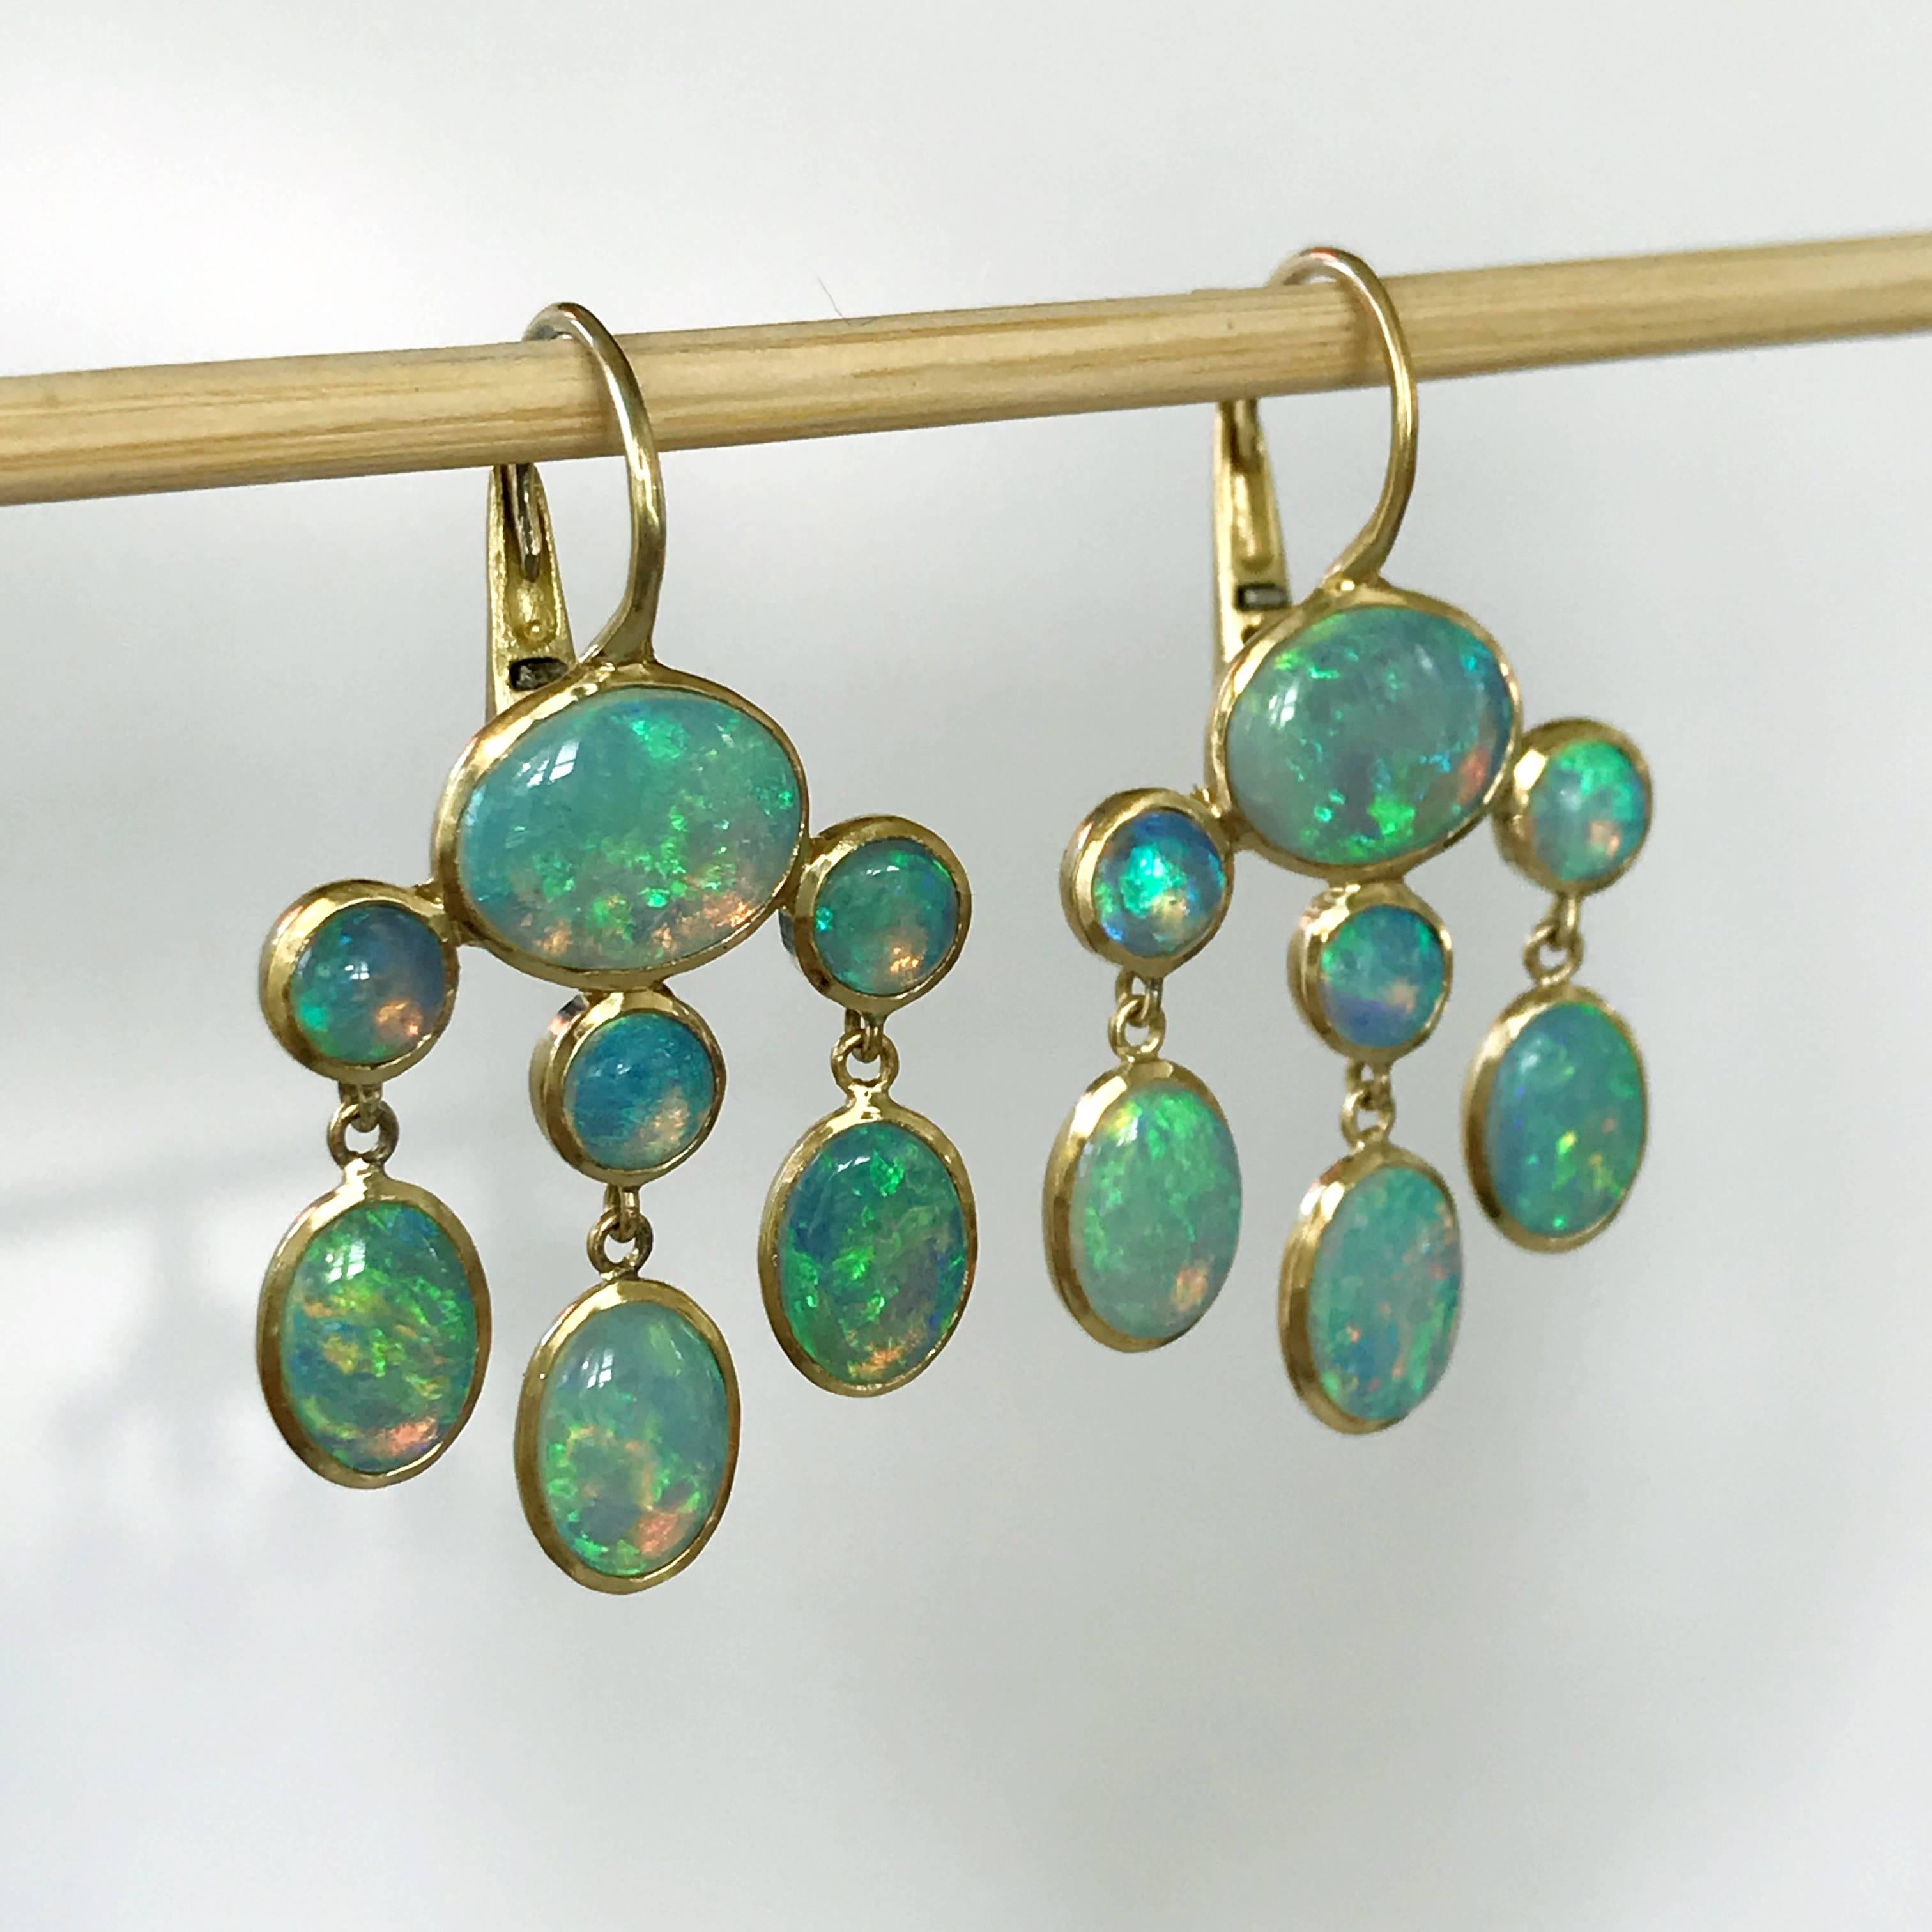 Dalben design 18k yellow gold semi lucid finishing earrings with 14 bezel set Australian Opals .  
Dimension: 
width 18,8 mm height without leverback 23 mm  
The earrings has been designed and handcrafted in our atelier in Como Italy with a rigorous